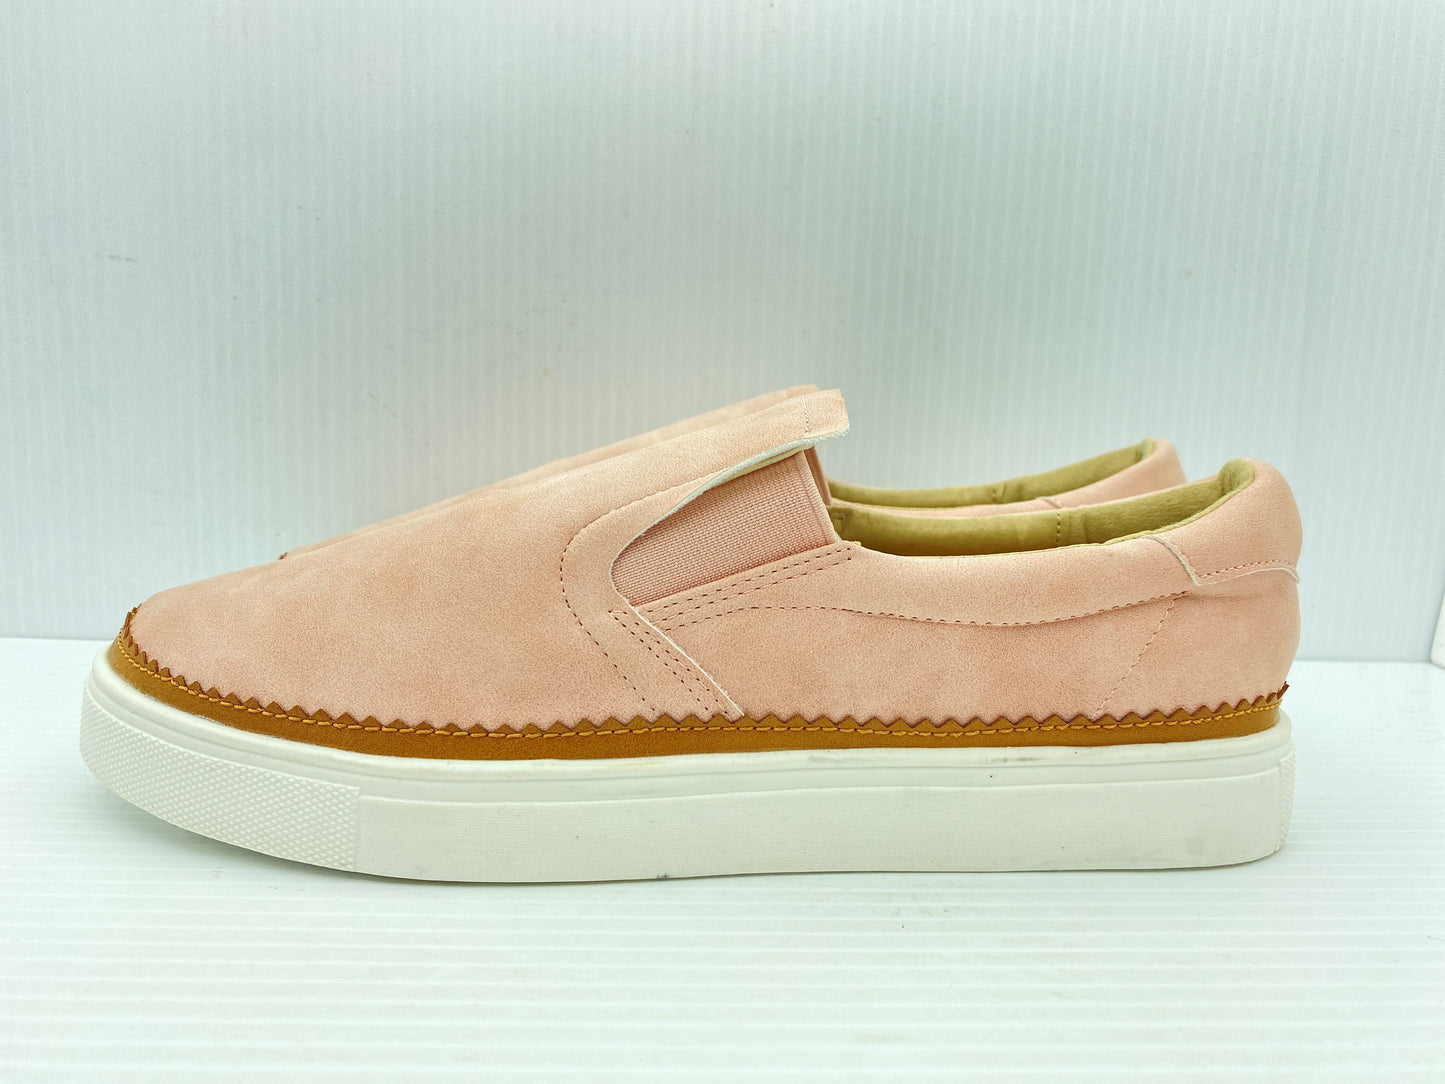 Shoes Flats Boat By Clothes Mentor  Size: 9